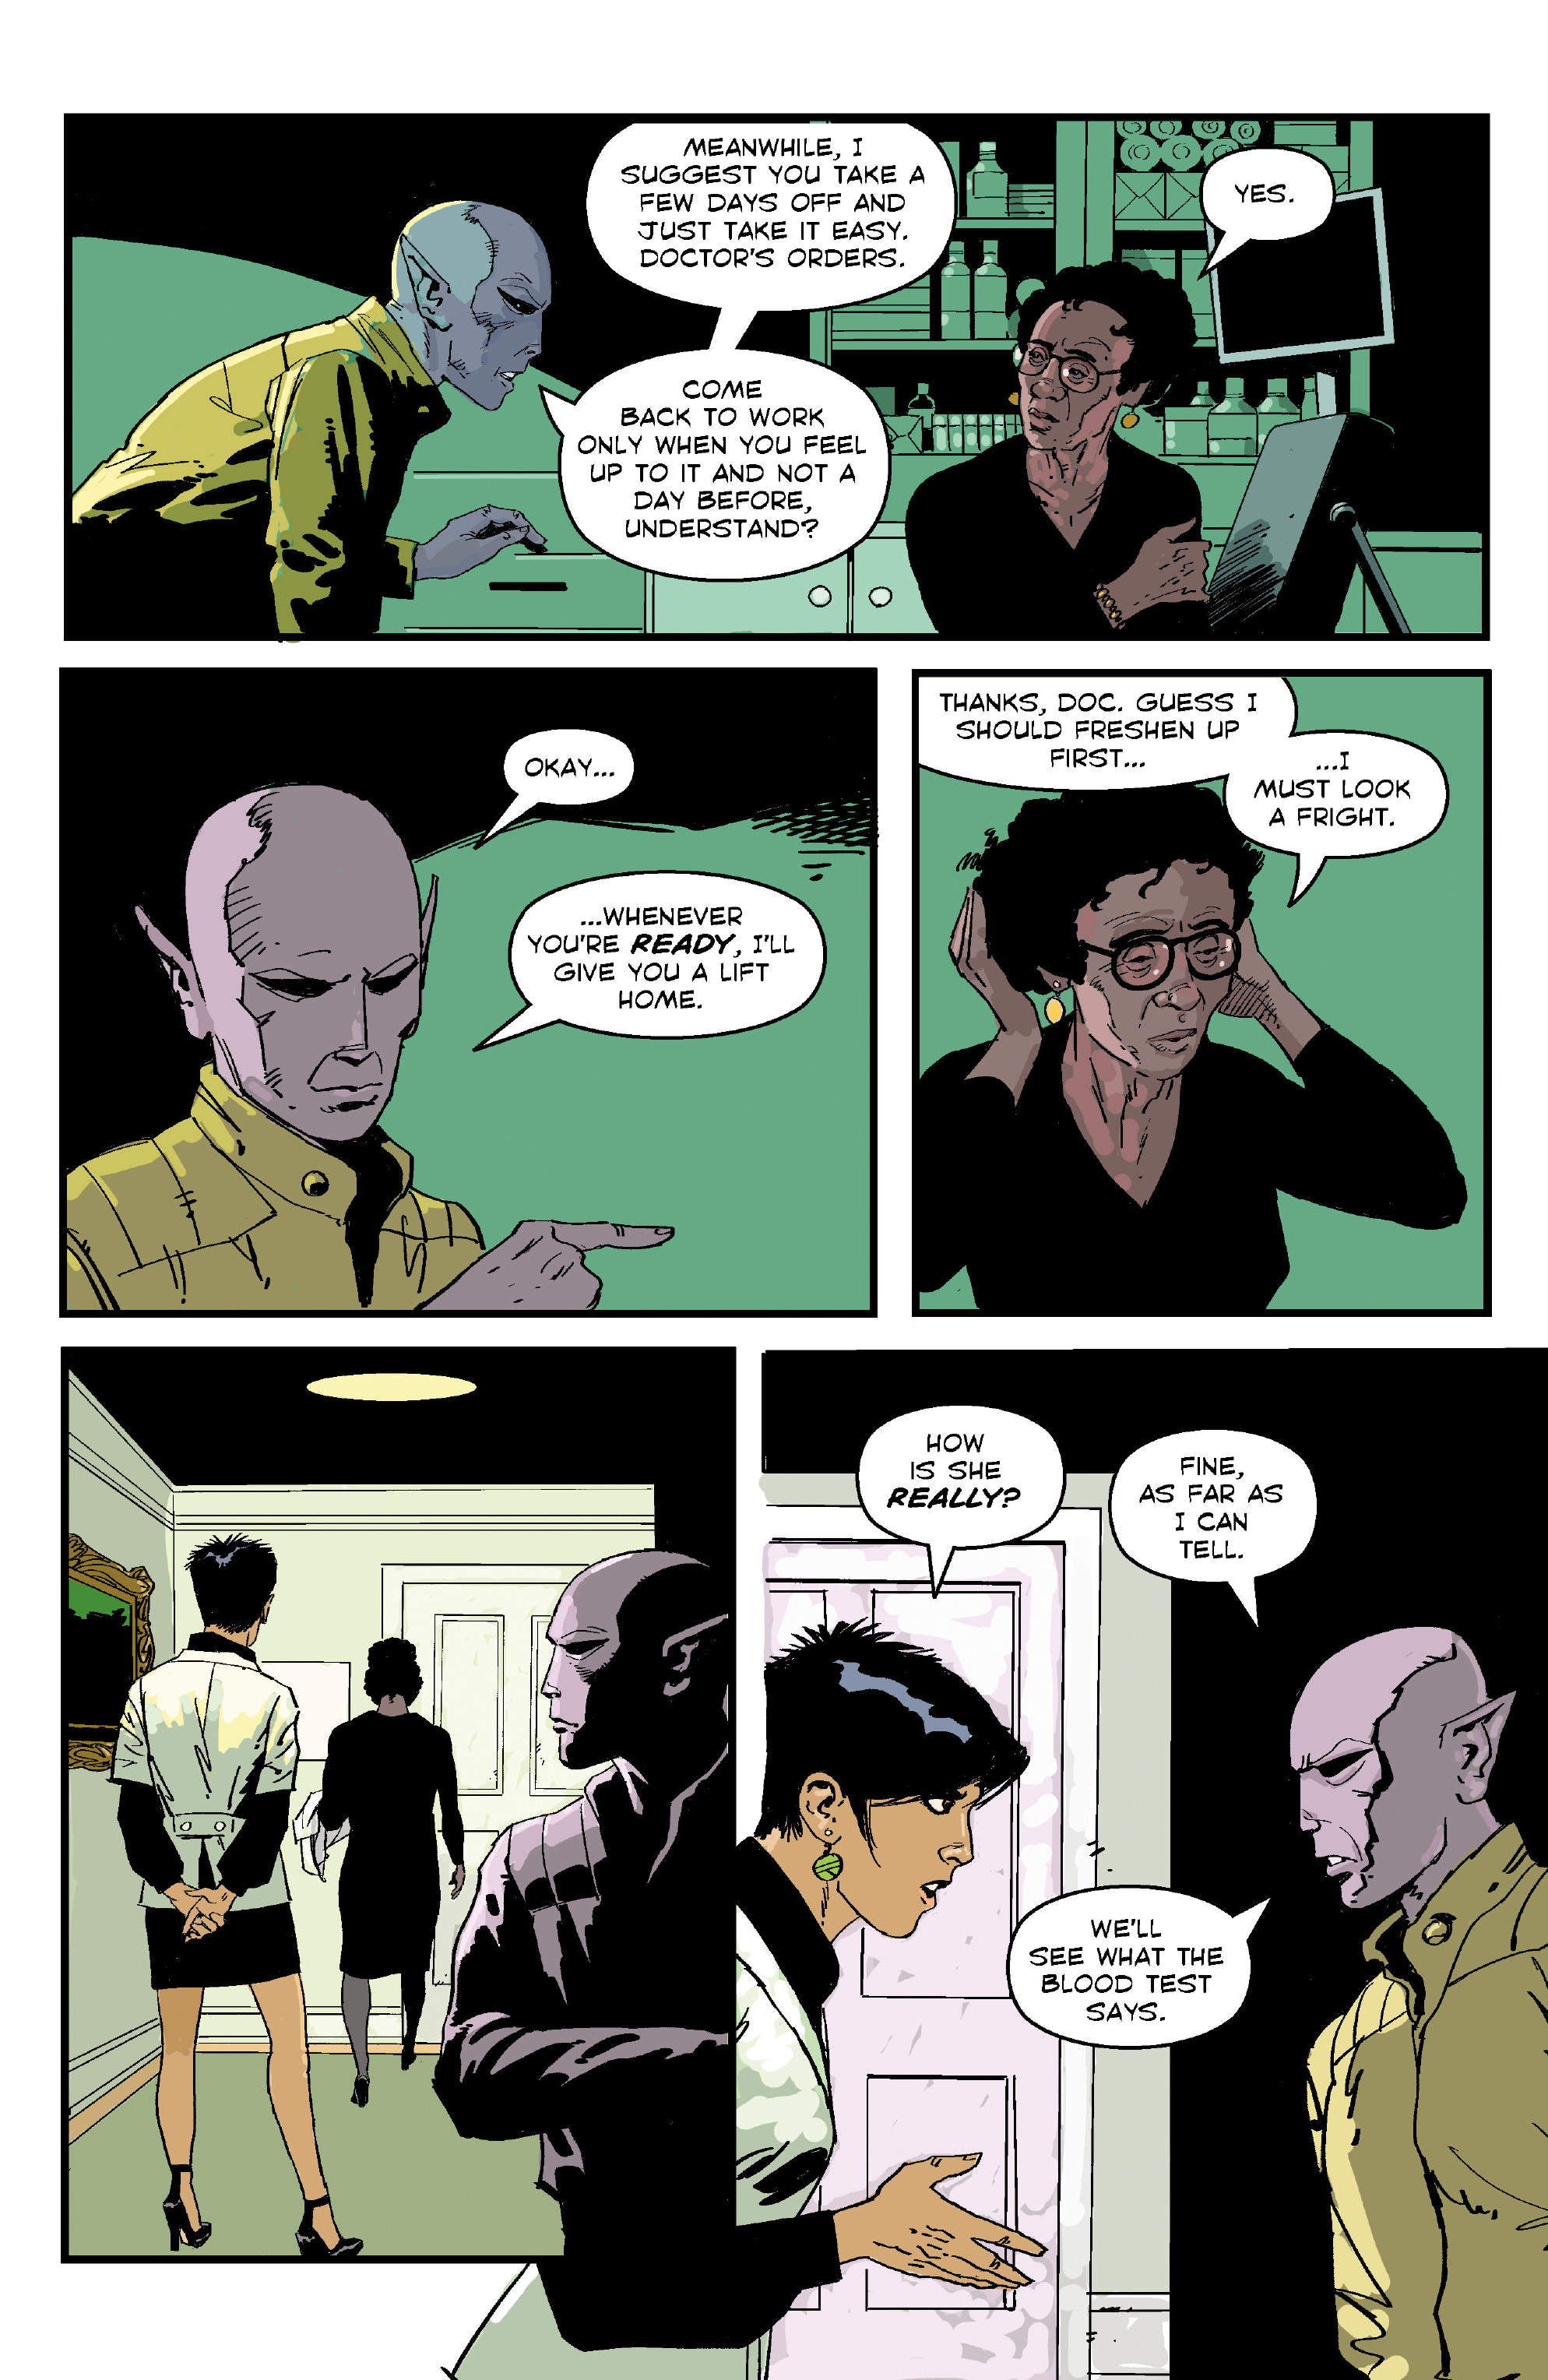 Resident Alien: Your Ride's Here (2020-): Chapter 3 - Page 4